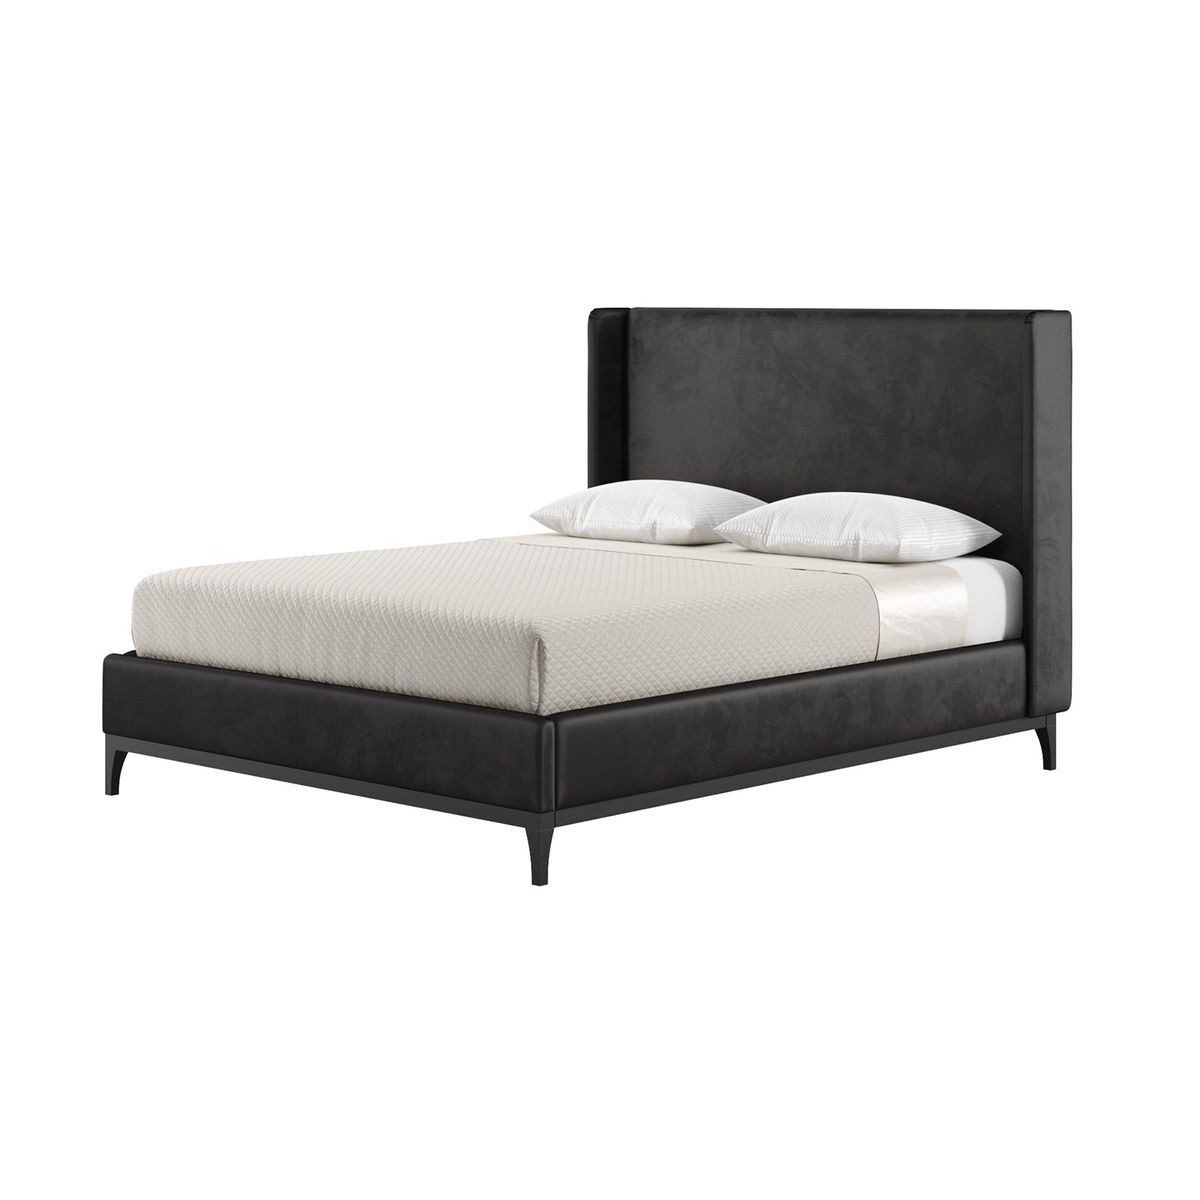 Diane 5ft King Size Bed Frame with modern smooth wing headboard, black, Leg colour: black - image 1